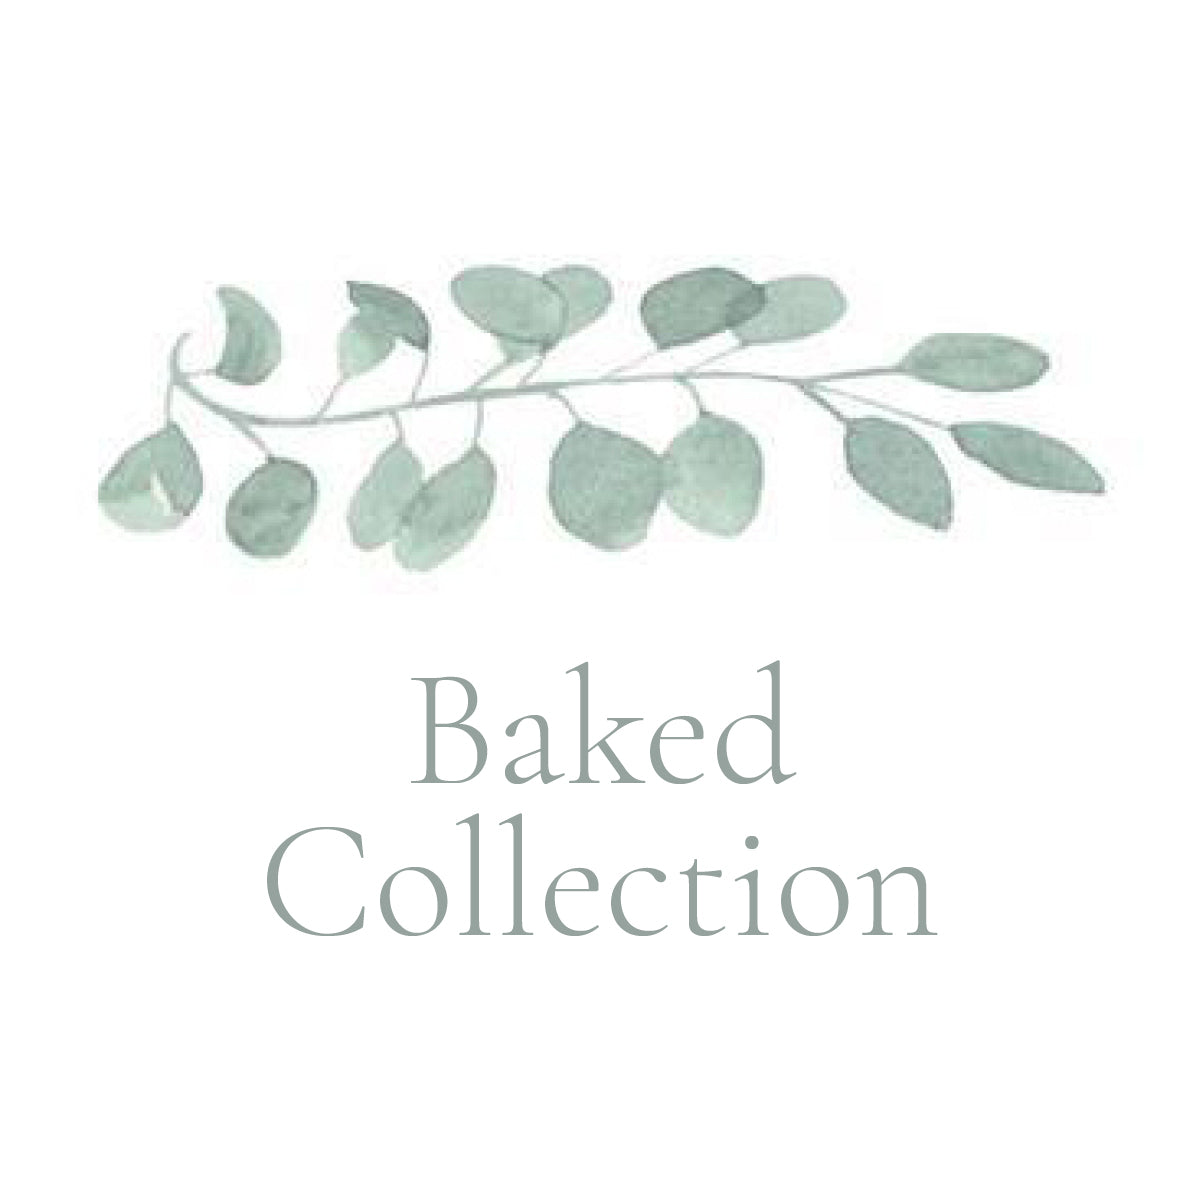 The Baked Collection